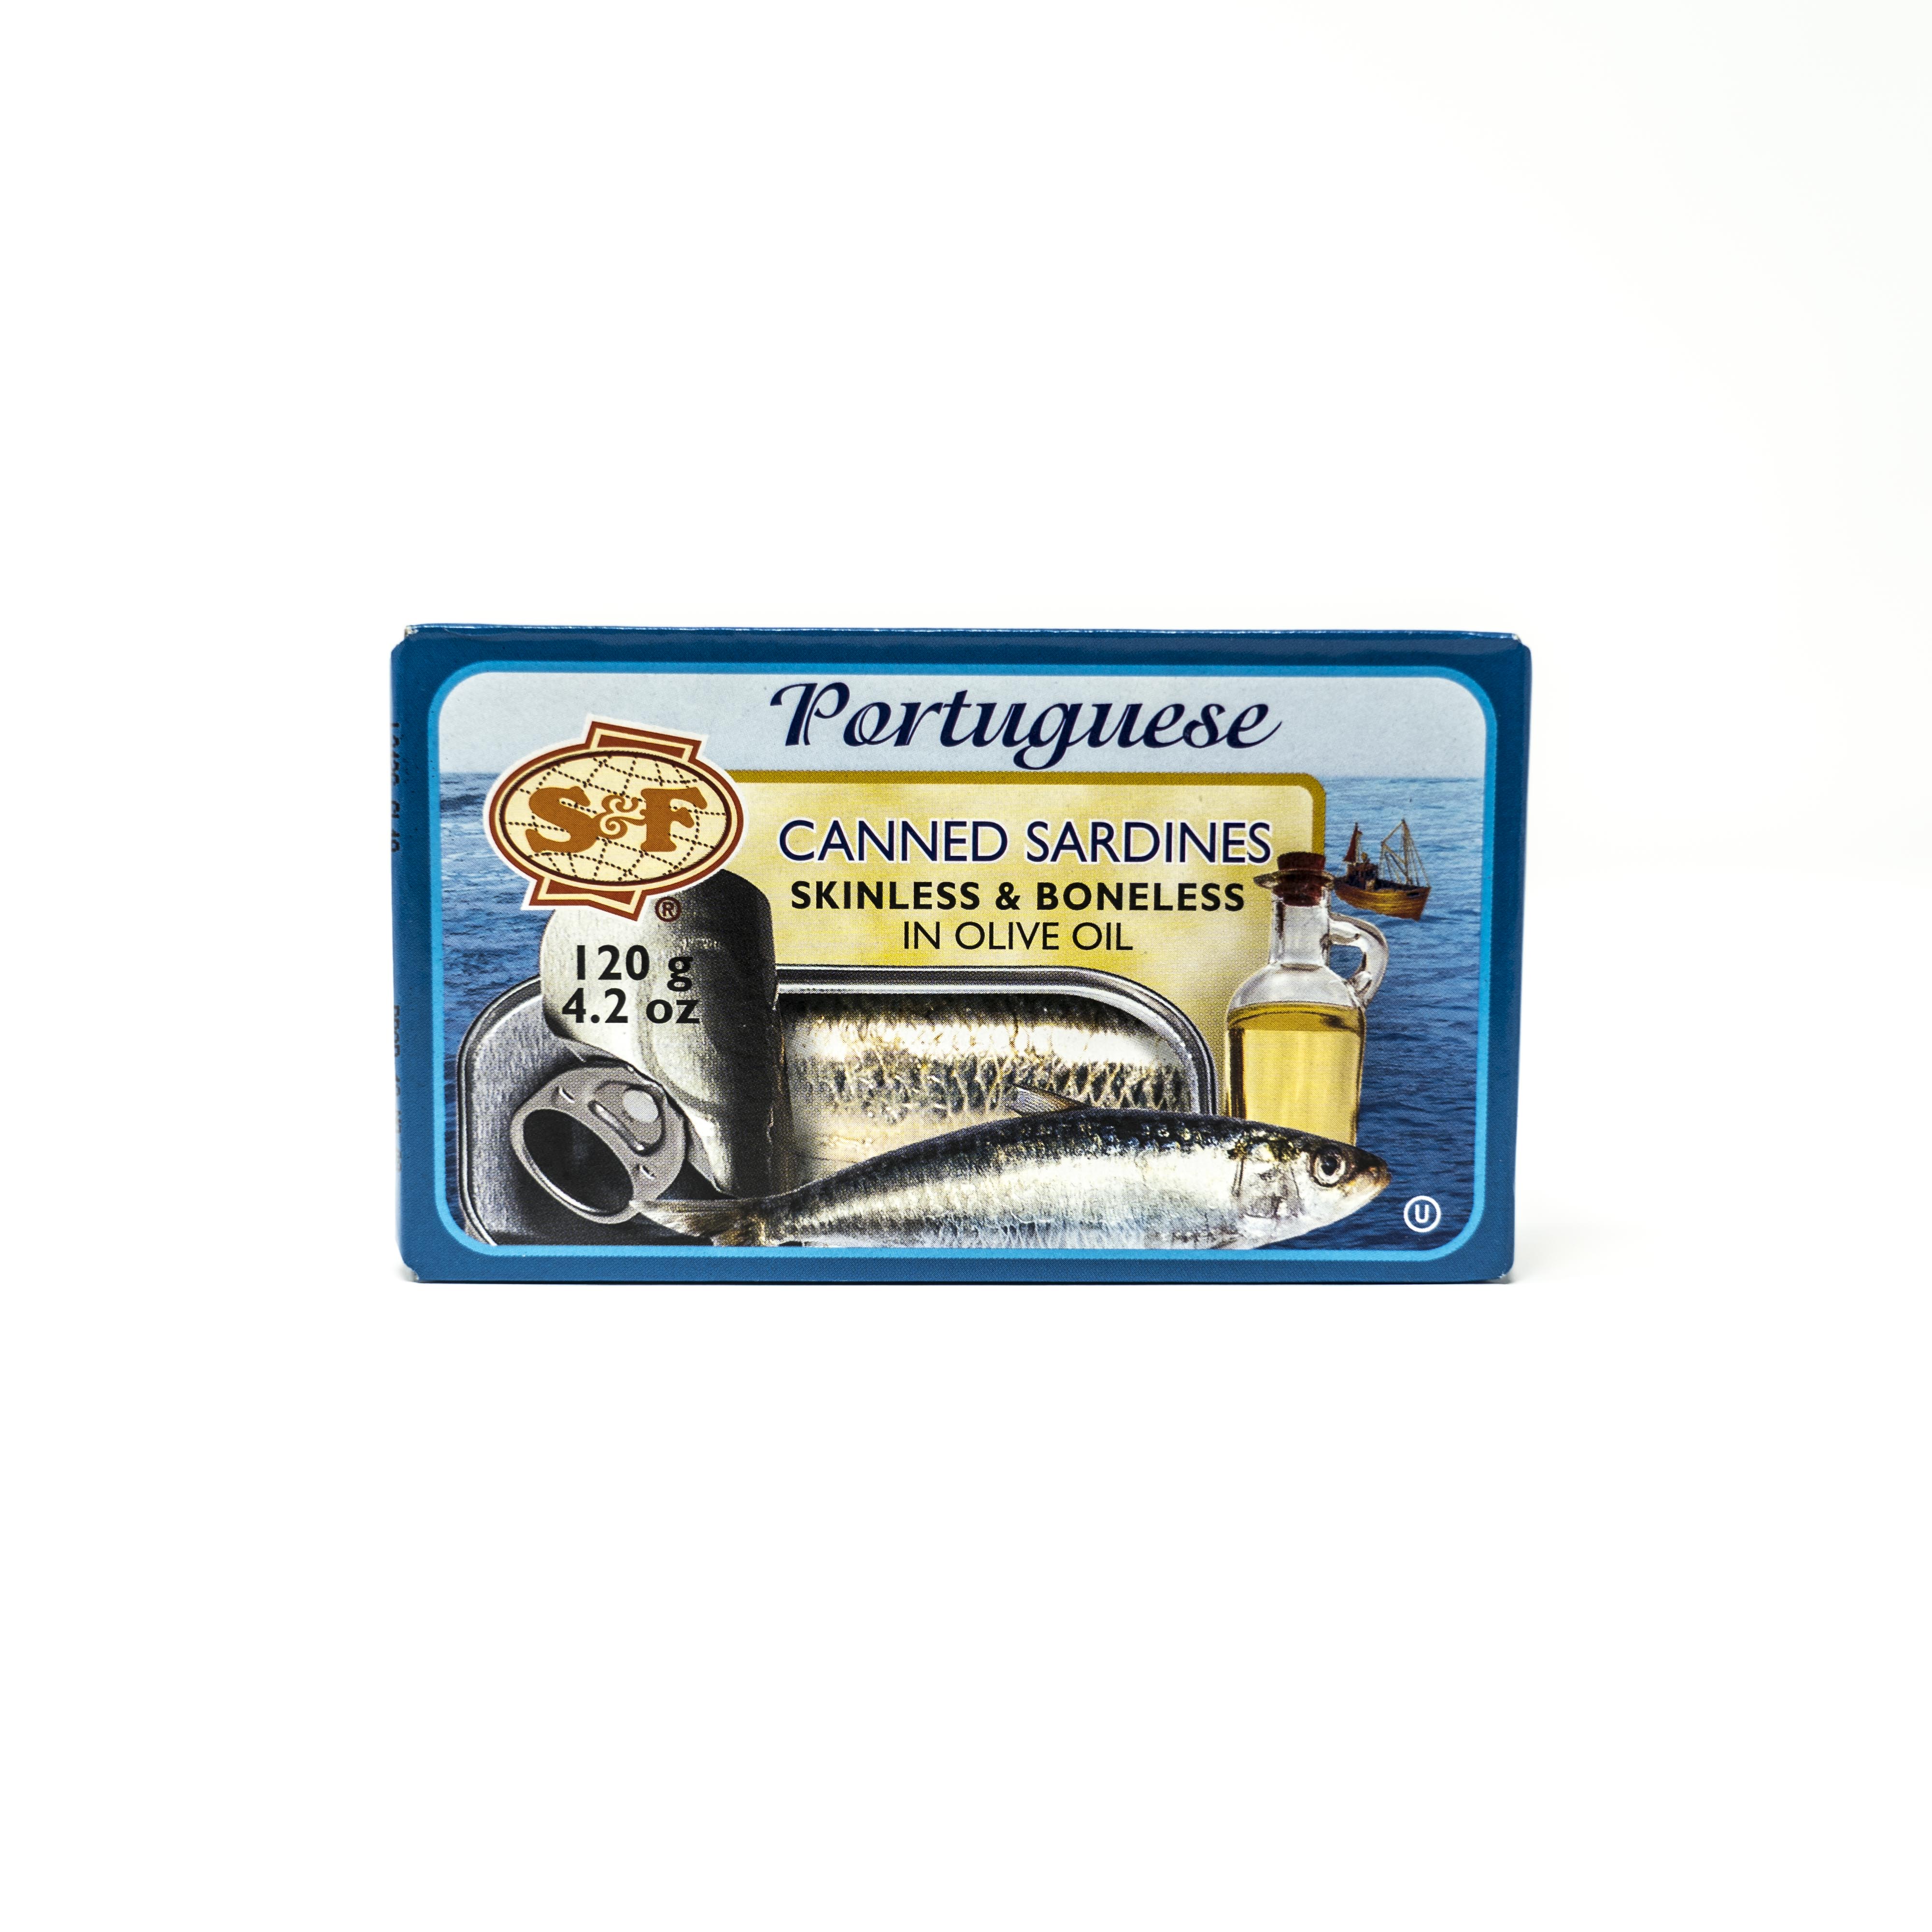 S&F Portuguese Canned Sardines Skinless Boneless in Olive Oil